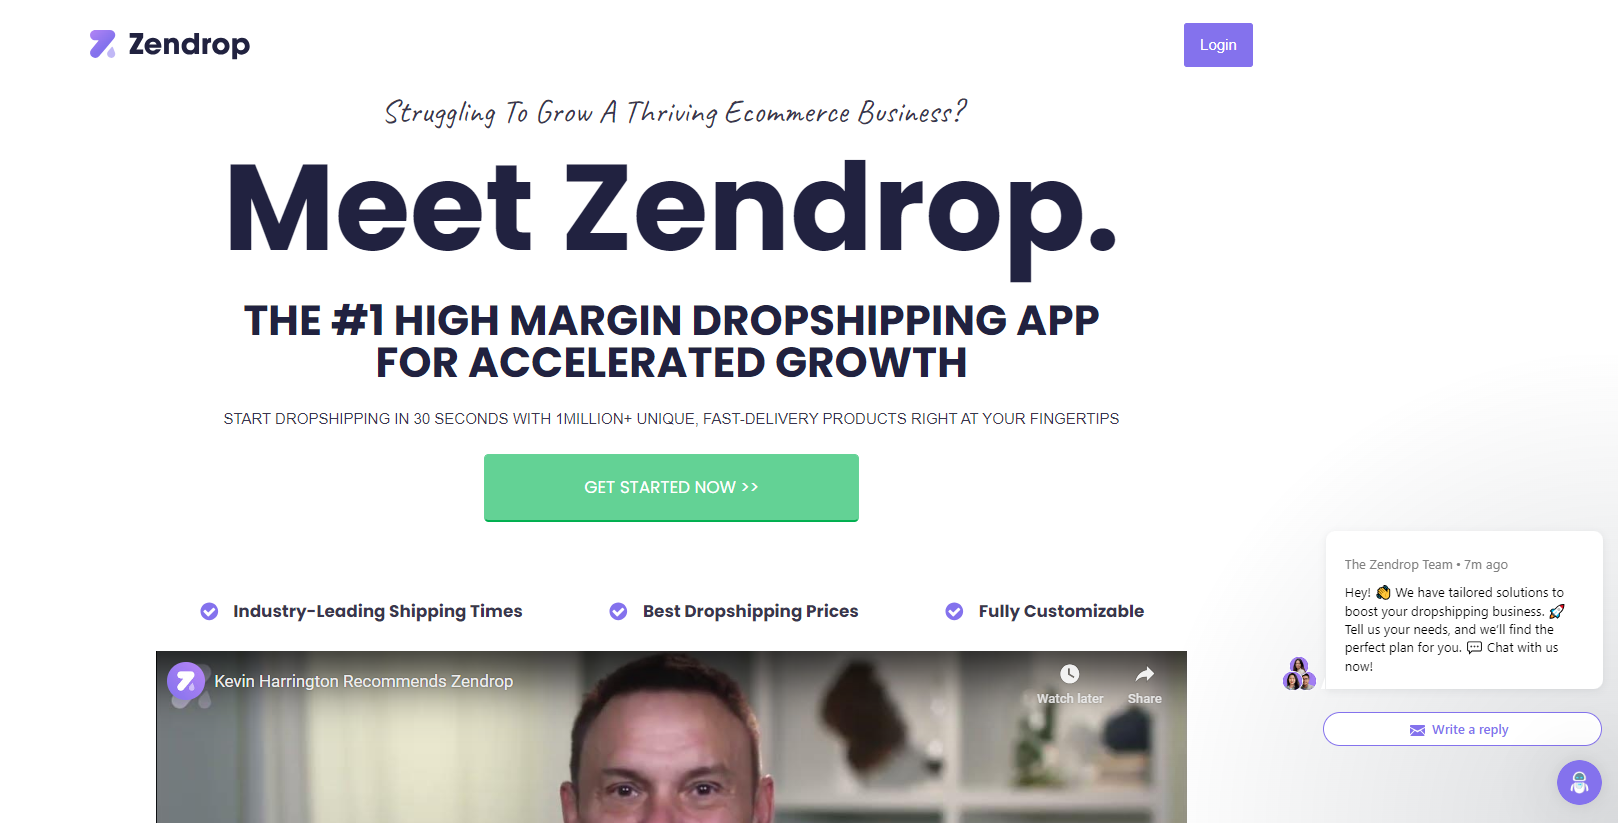 Zendrop is an eCommerce dropshipping platform based in the United States. It is an ideal solution for anyone looking to enter the private label dropshipping business. 